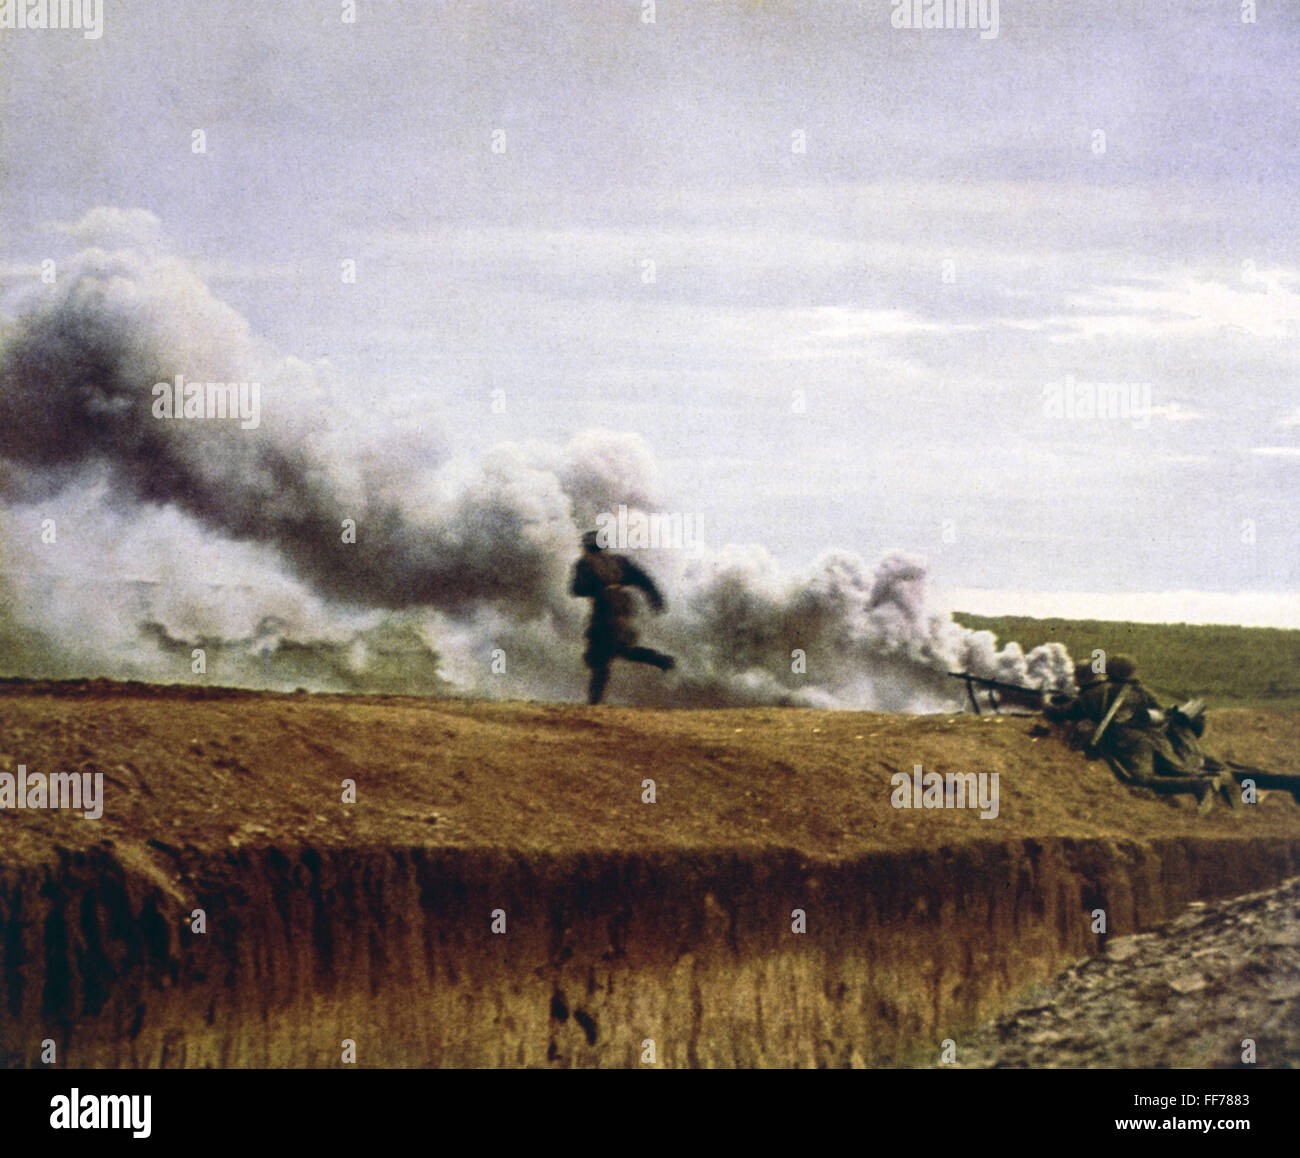 events, Second World War / WWII, German Wehrmacht, infantry attacking, smoke, machinegun troop, machine gun, soldiers, infantrymen, running, Third Reich, Germany, 20th century, historic, historical, military, army, people, 1930s, 1940s, Additional-Rights-Clearences-Not Available Stock Photo